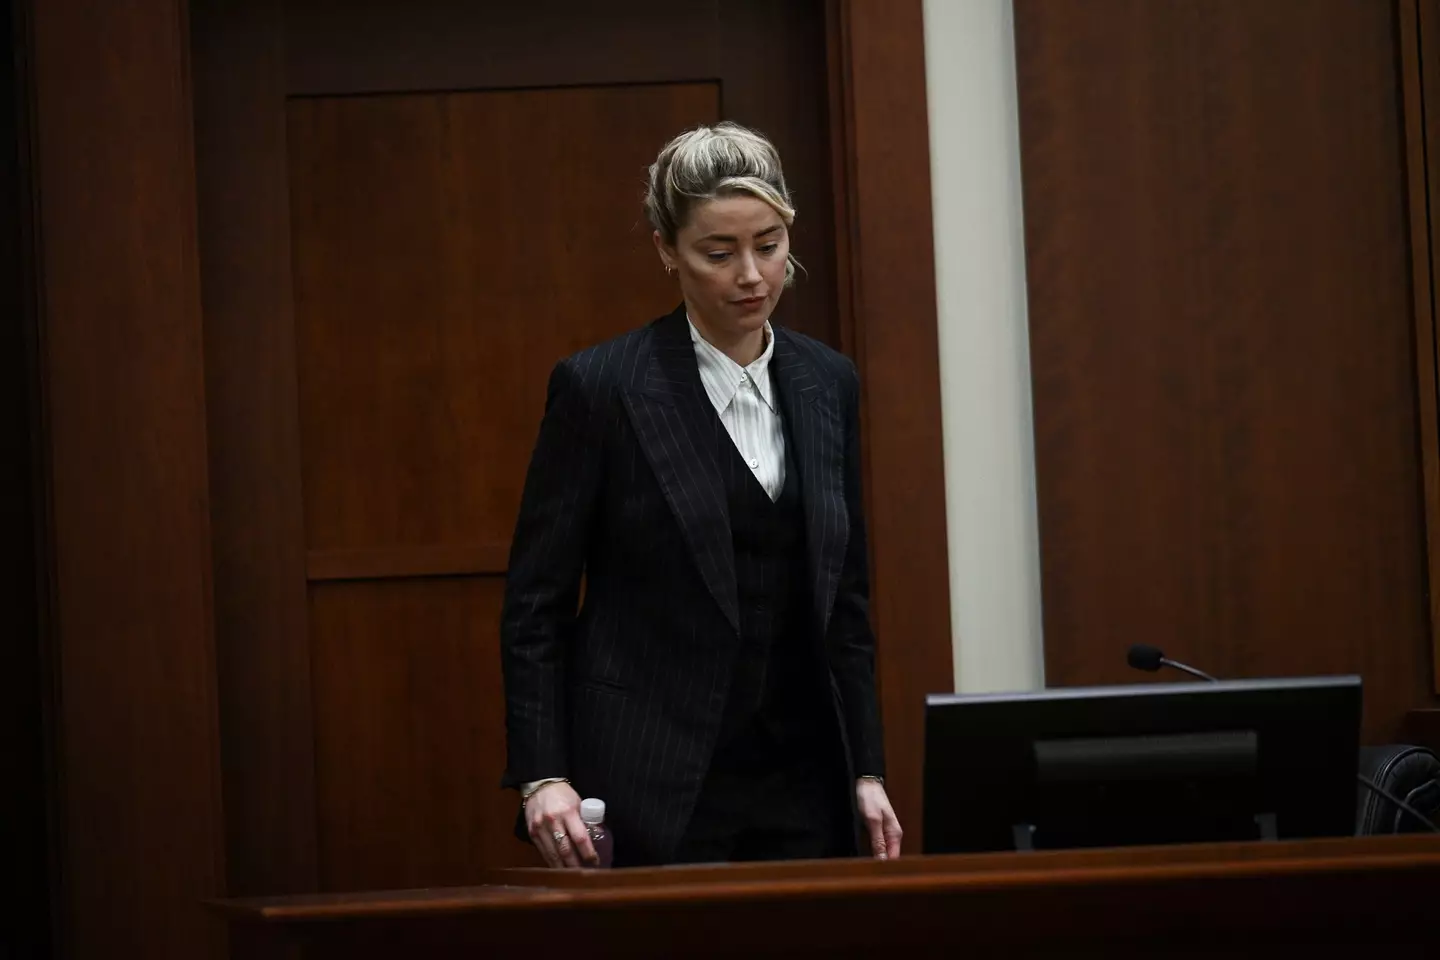 uring what is expected to be the final week of the trial, Heard has formally rested her case on Tuesday - meaning that her legal team has finished explaining their case and are ready for the judge or jury to decide on the outcome.